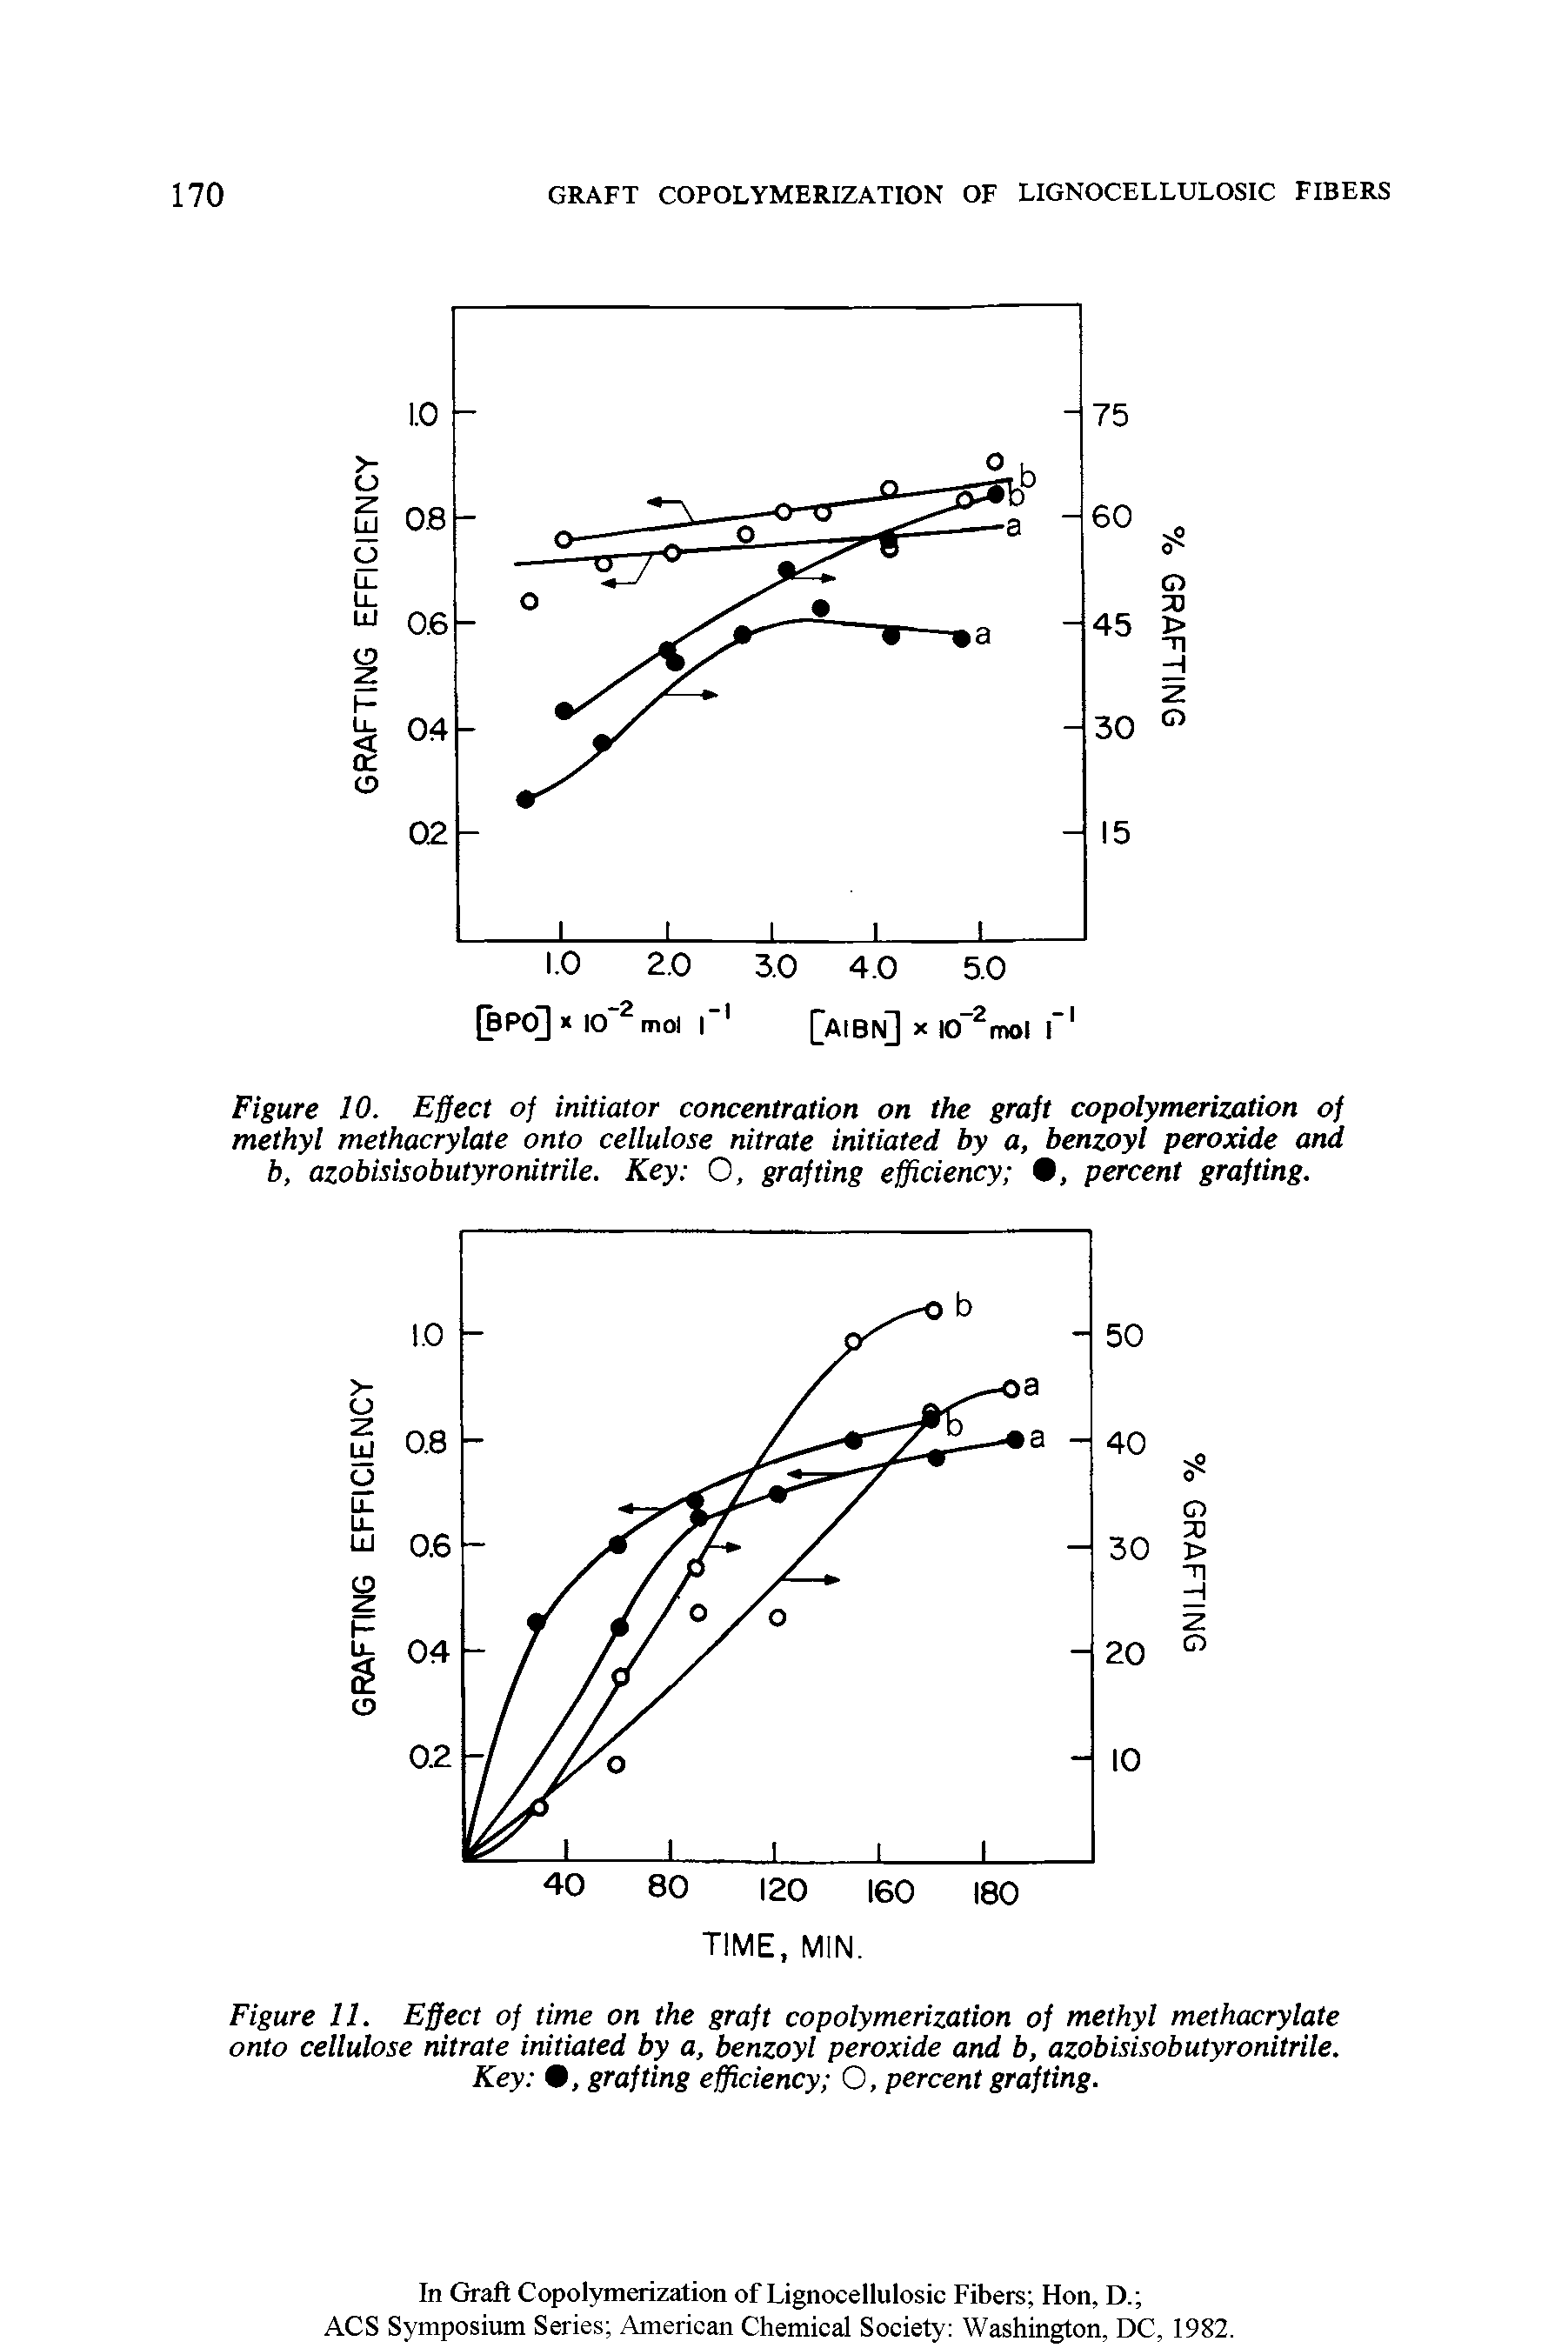 Figure 10. Effect of initiator concentration on the graft copolymerization of methyl methacrylate onto cellulose nitrate initiated by a, benzoyl peroxide and b, azobisisobutyronitrile. Key O, grafting efficiency 9, percent grafting.